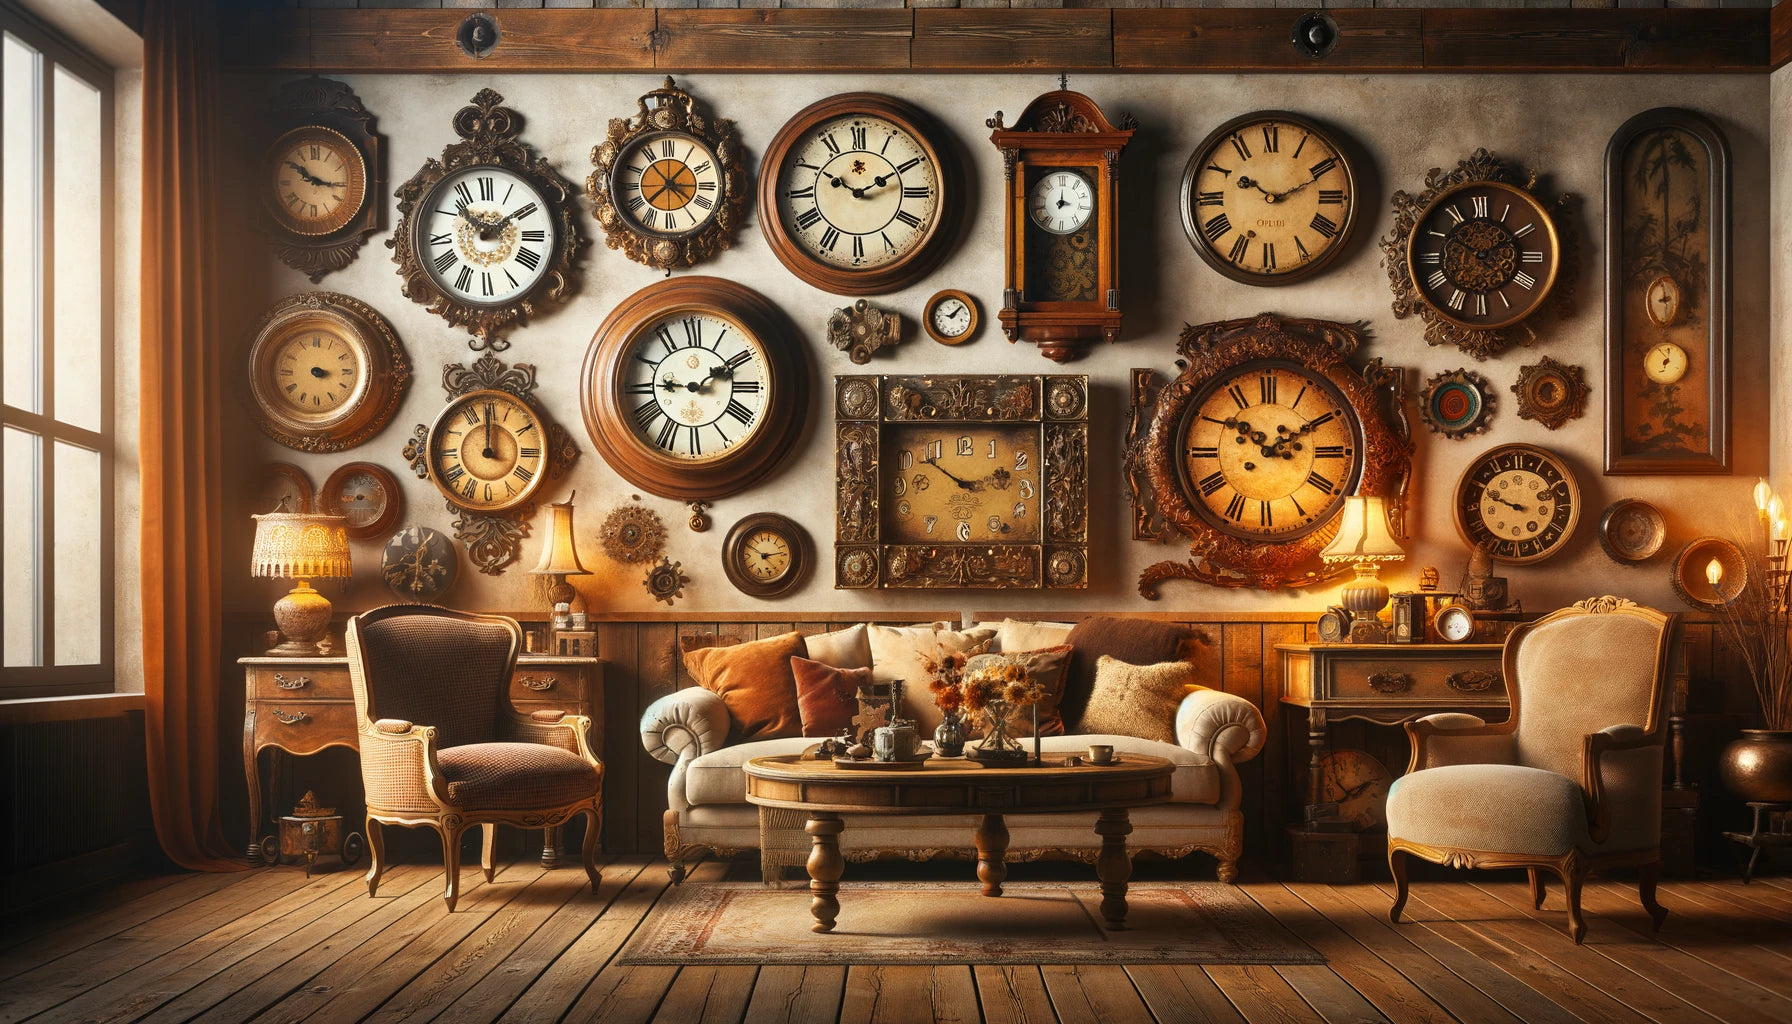 Antique Vintage Wall Clocks: Adding Timeless Charm to Your Home